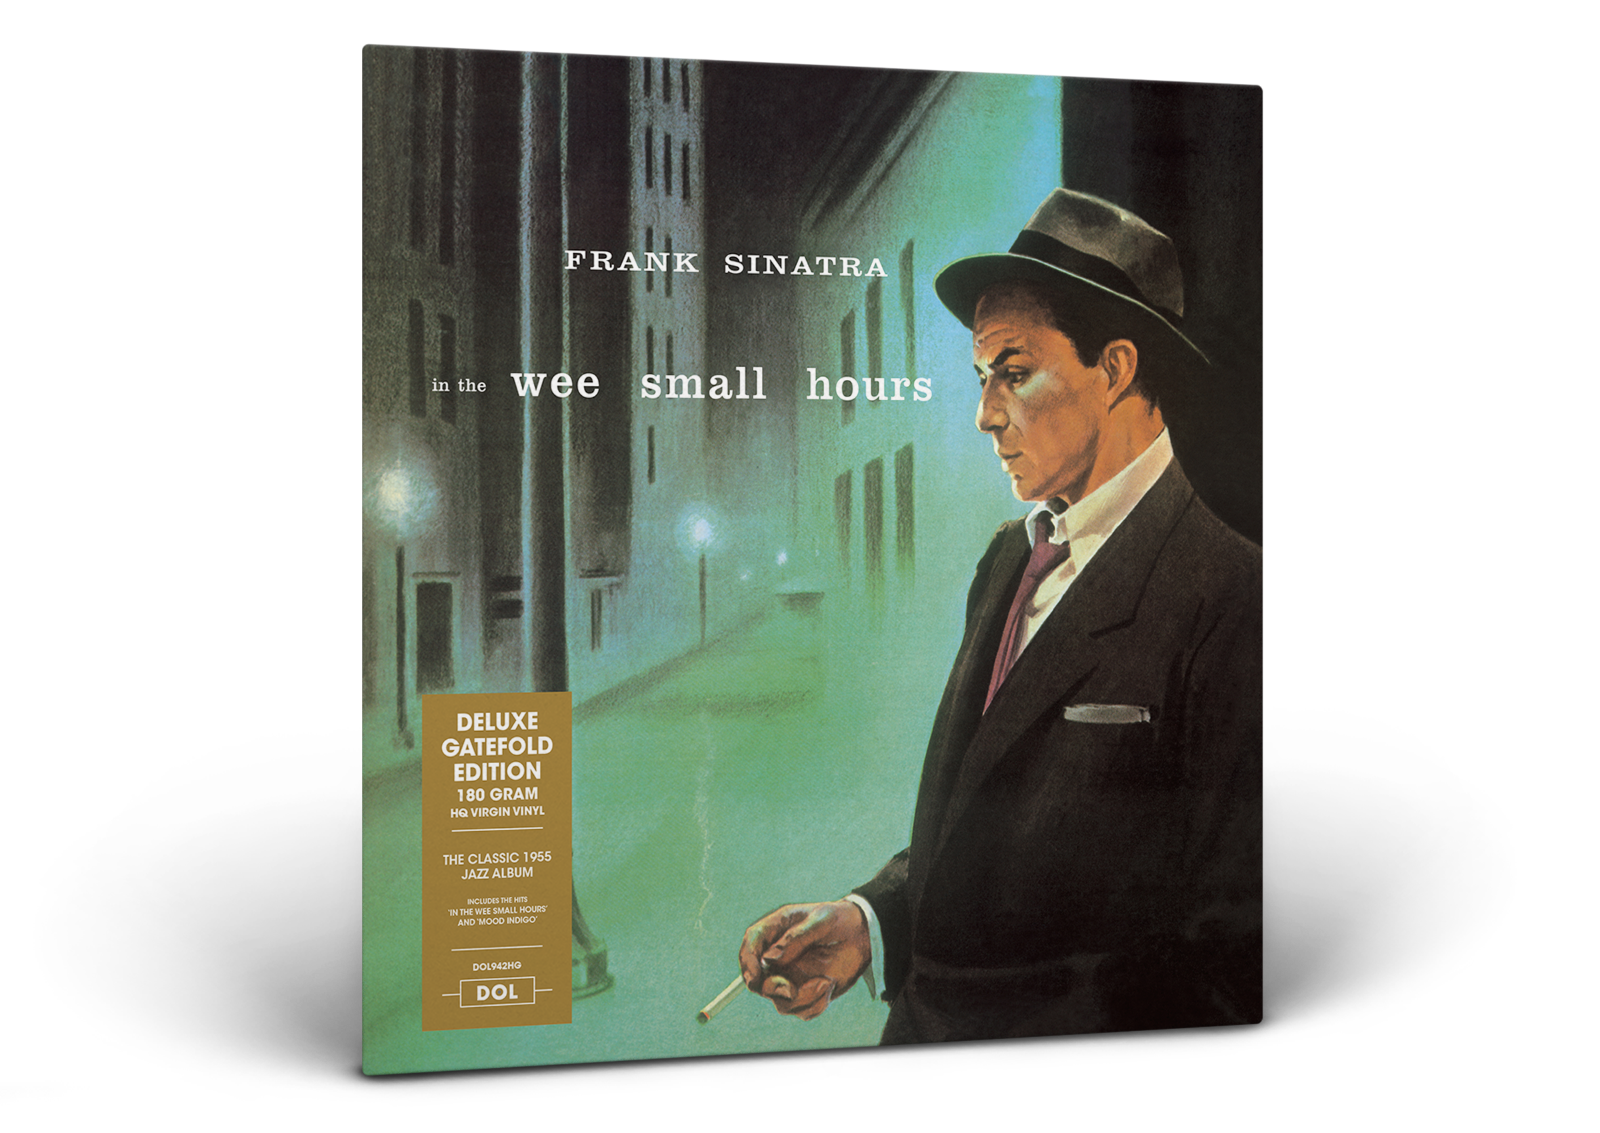 Frank Sinatra - in the Wee small hours (1955). Фрэнк Синатра in the Wee small. Часы Фрэнк Синатра. Фрэнк Синатра дуэты. Small hours